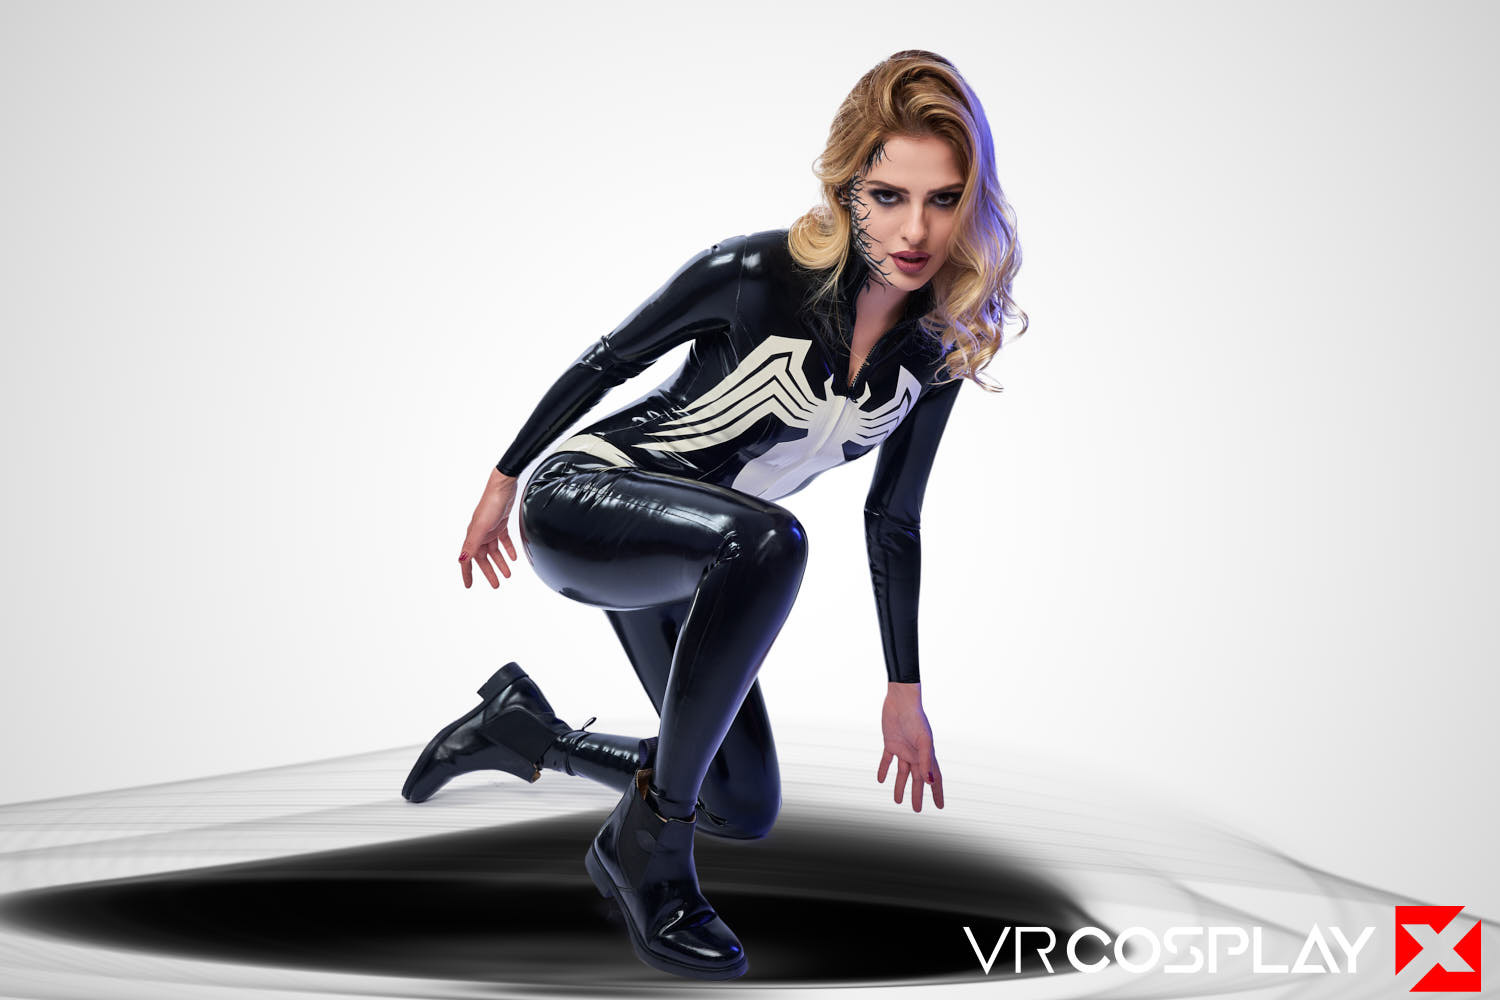 Mina Von D dressed in a skin-tight latex catsuit for kinky cosplay sex